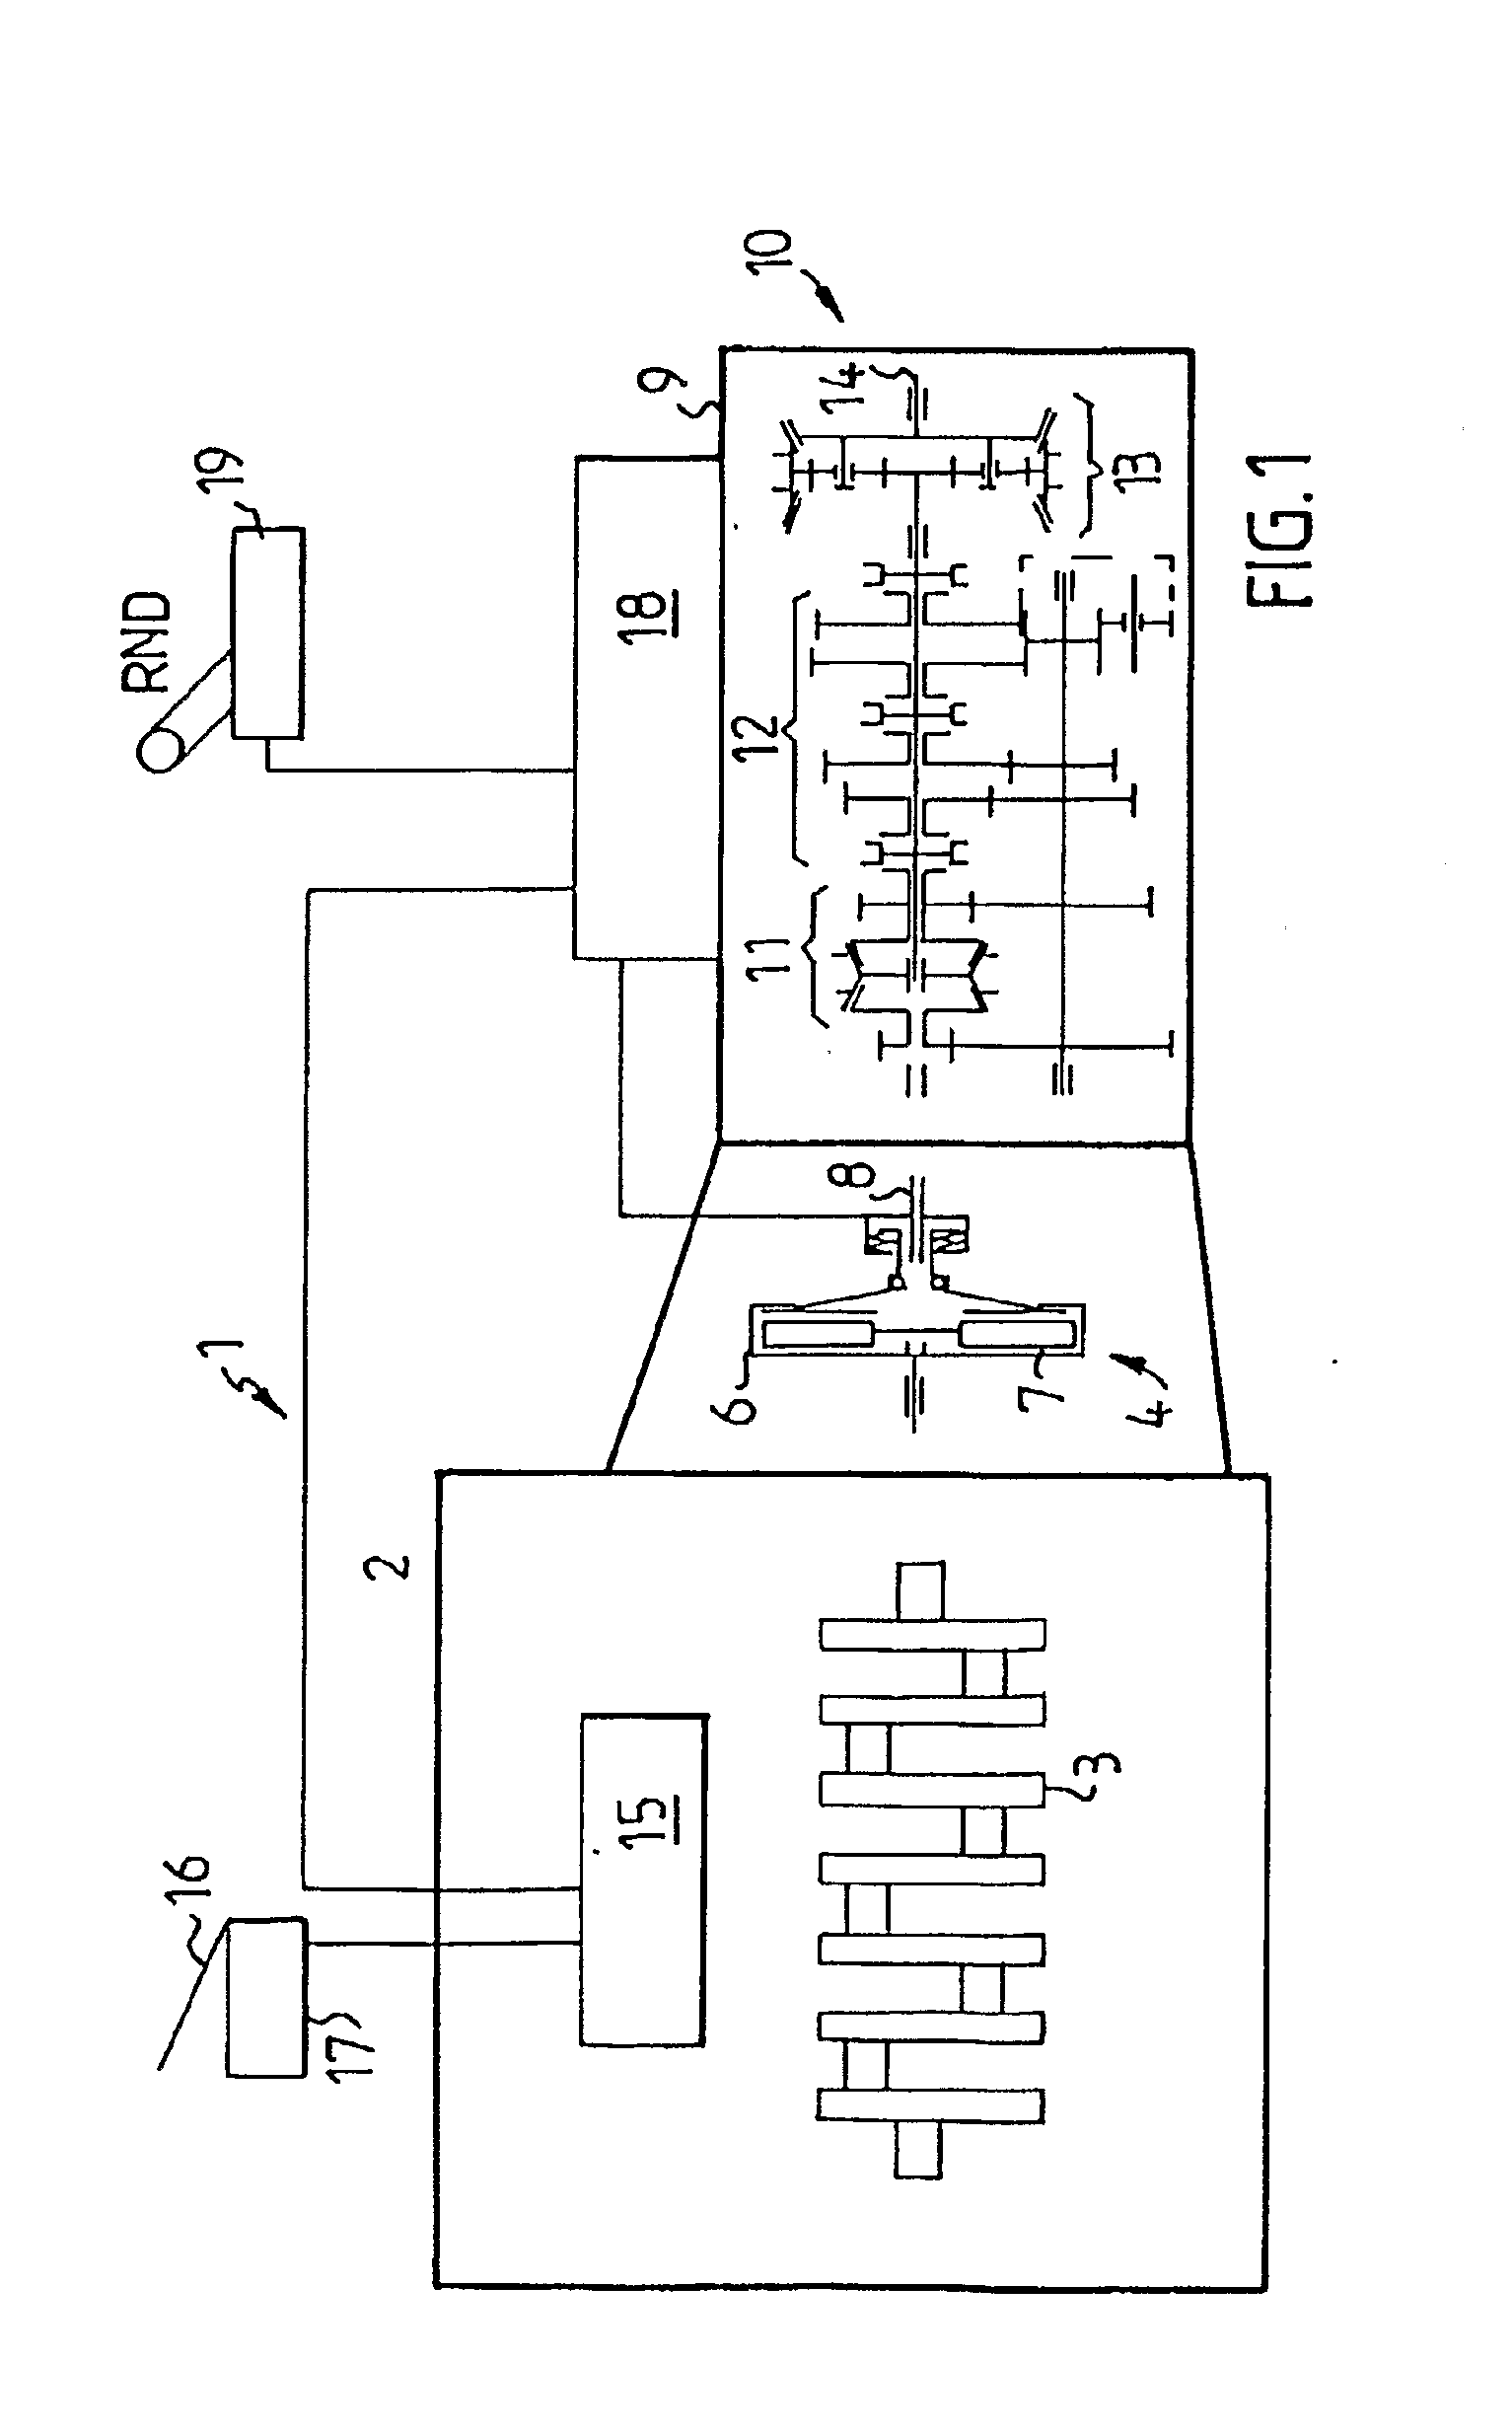 Method and Device For Controlling Engine Torque and Speed